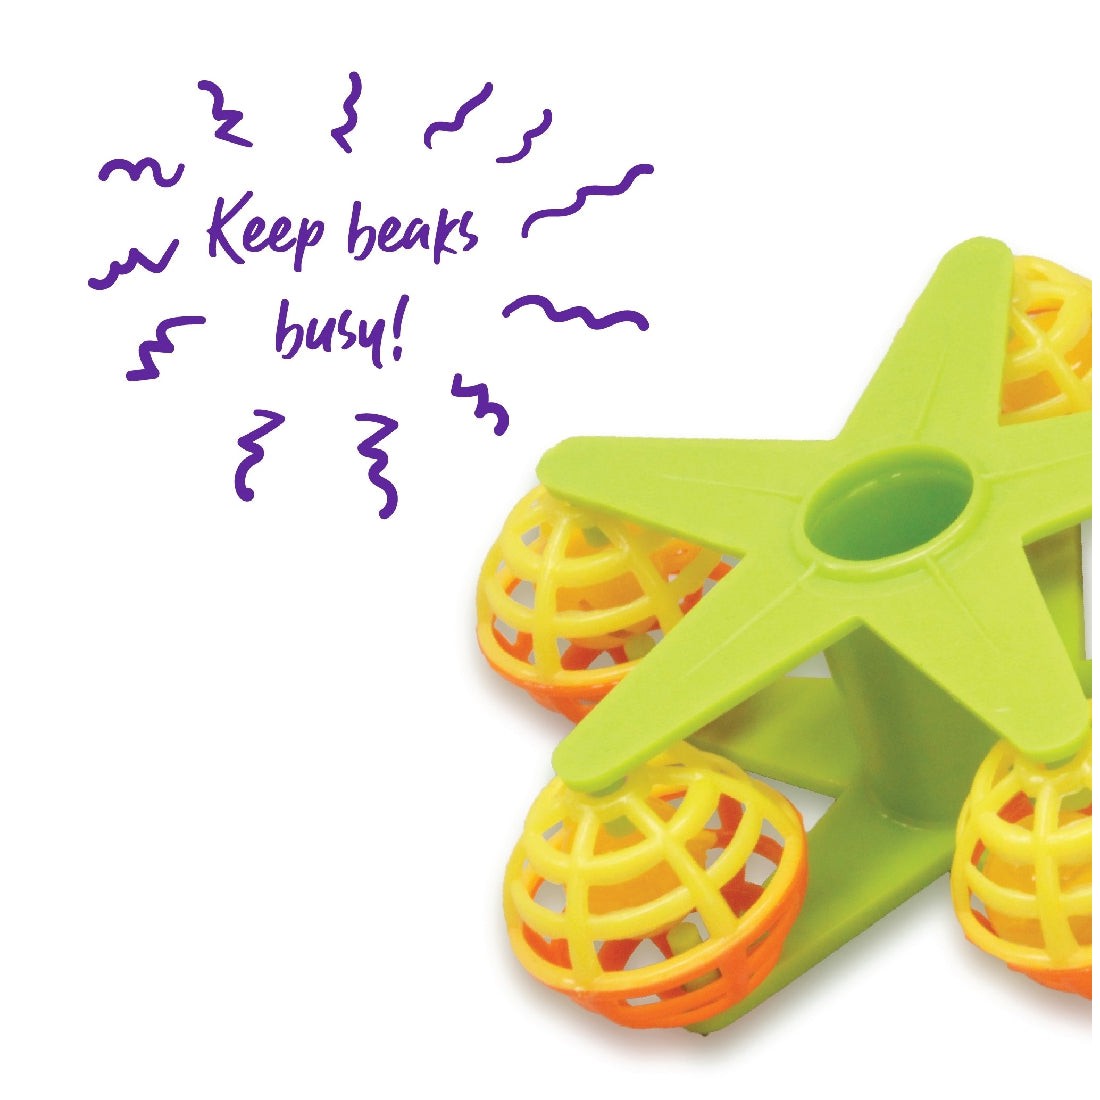 Alt text: Colorful star-shaped bird toy with text "Keep beaks busy!"